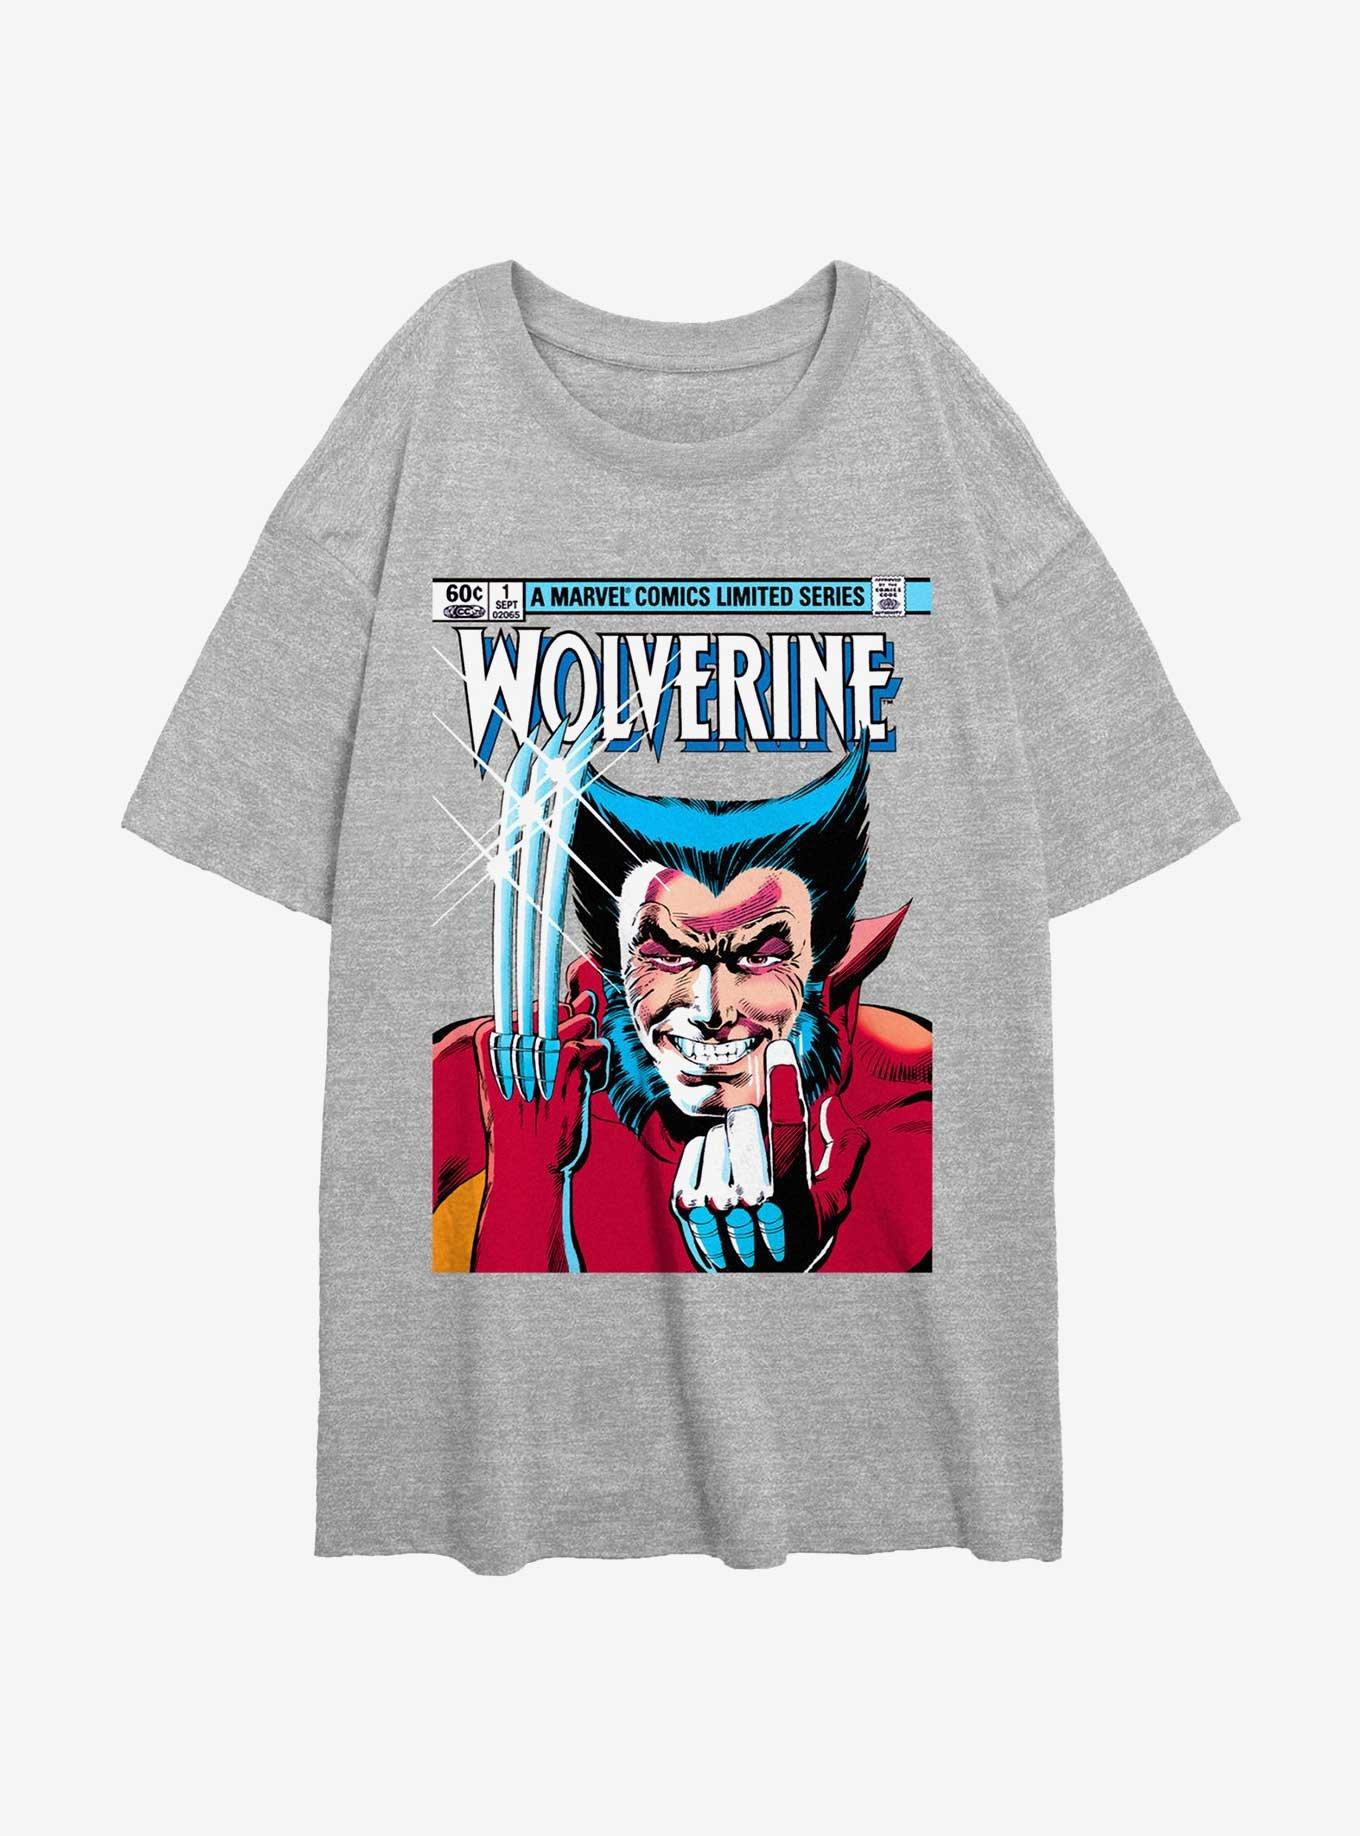 Wolverine 1st Issue Comic Cover Womens Oversized T-Shirt, ATH HTR, hi-res